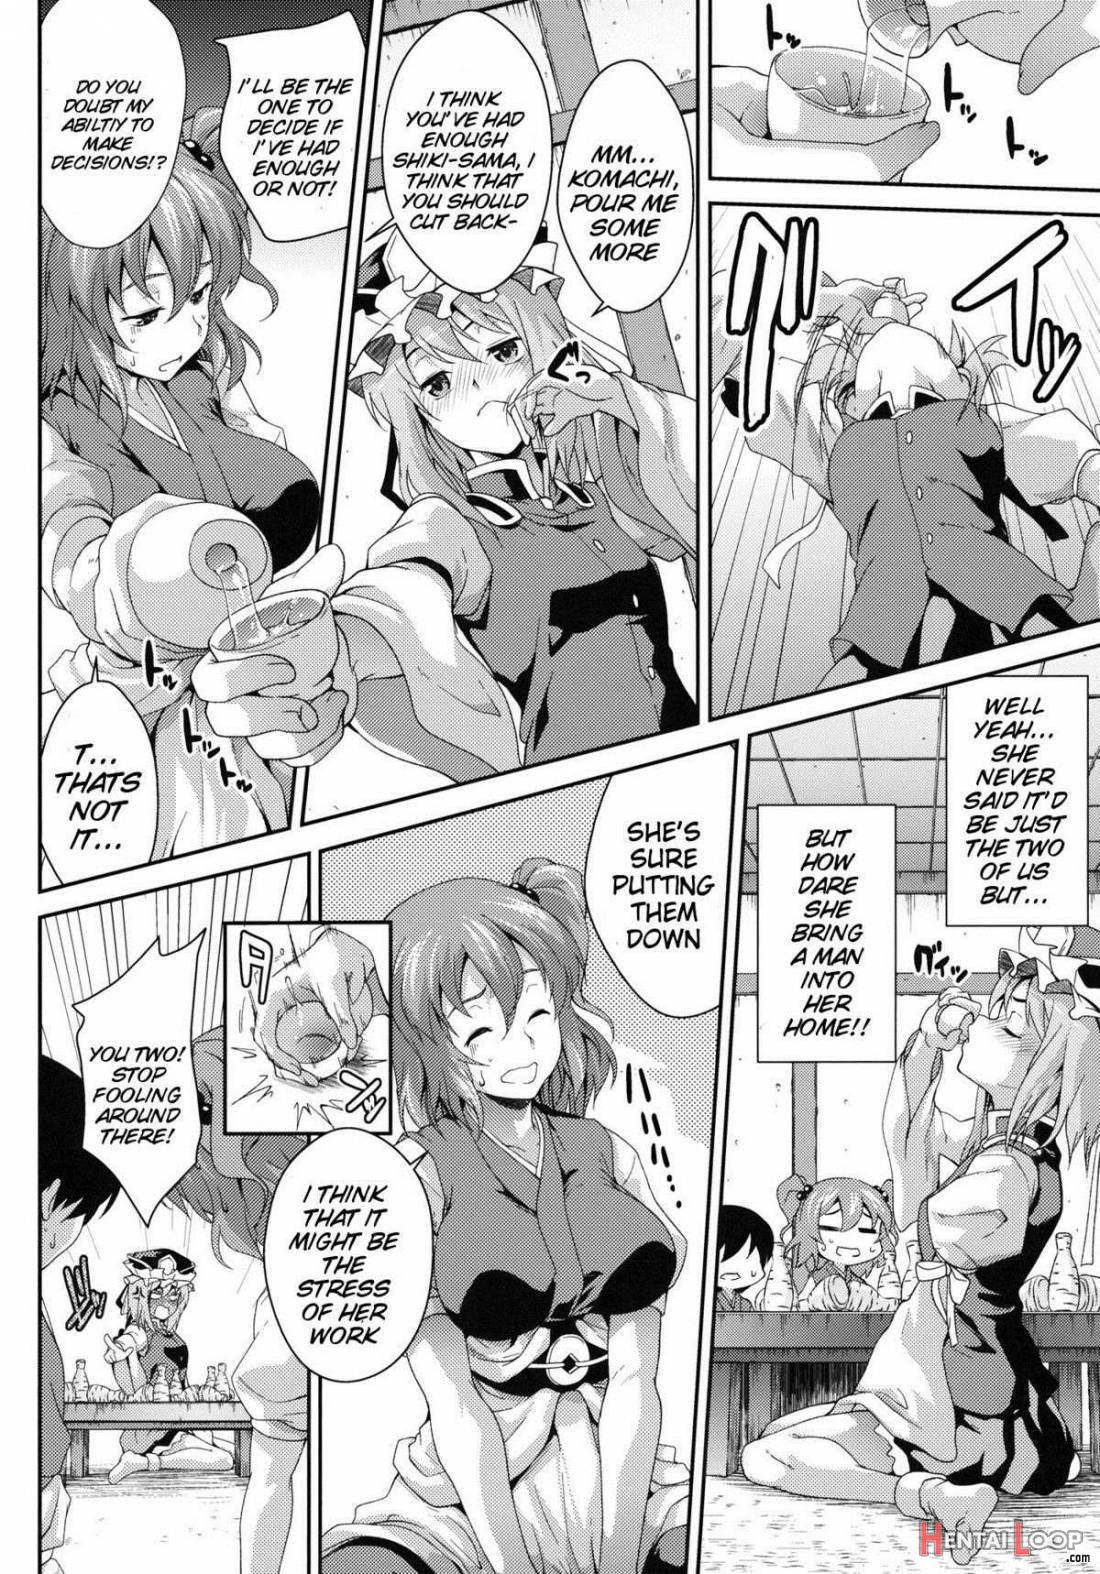 Together With Komachi 3 page 7